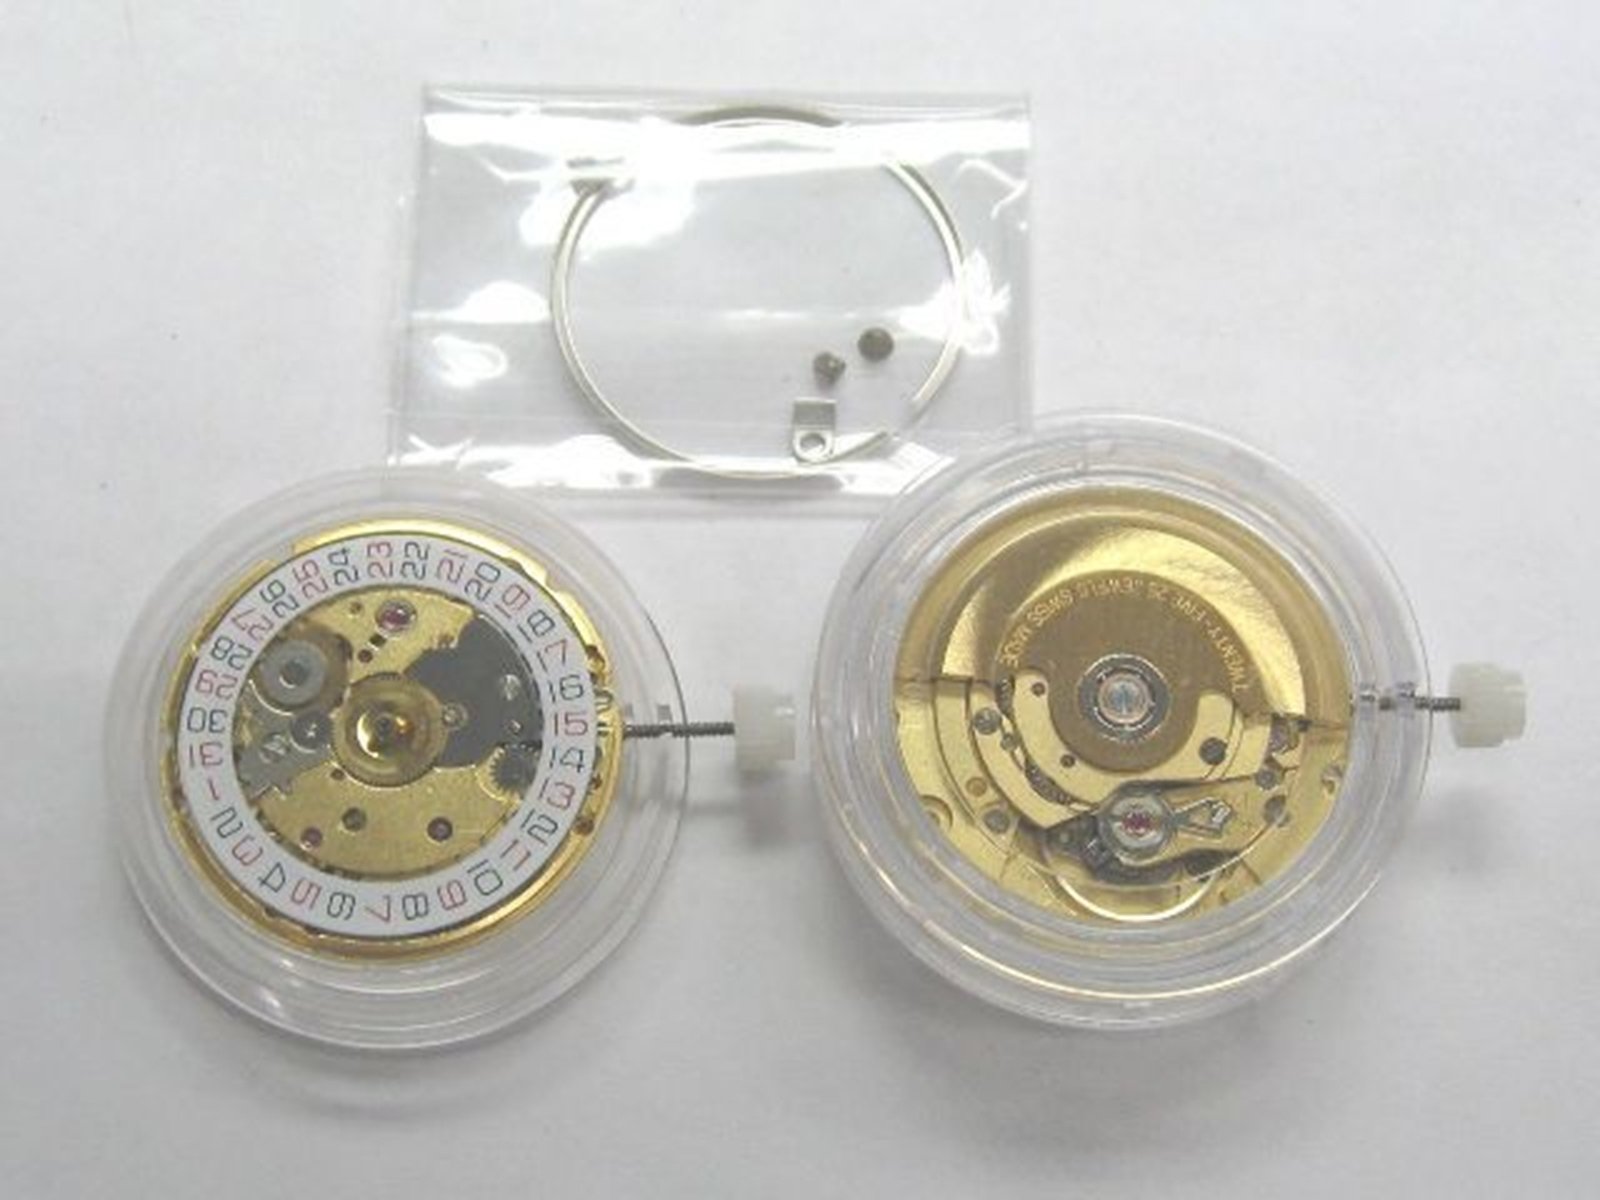 Ewatchparts Genuine Compatible with ETA 2824-2 Automatic Watch Movement 25 Jewel Date @3 Gold New Swiss Made